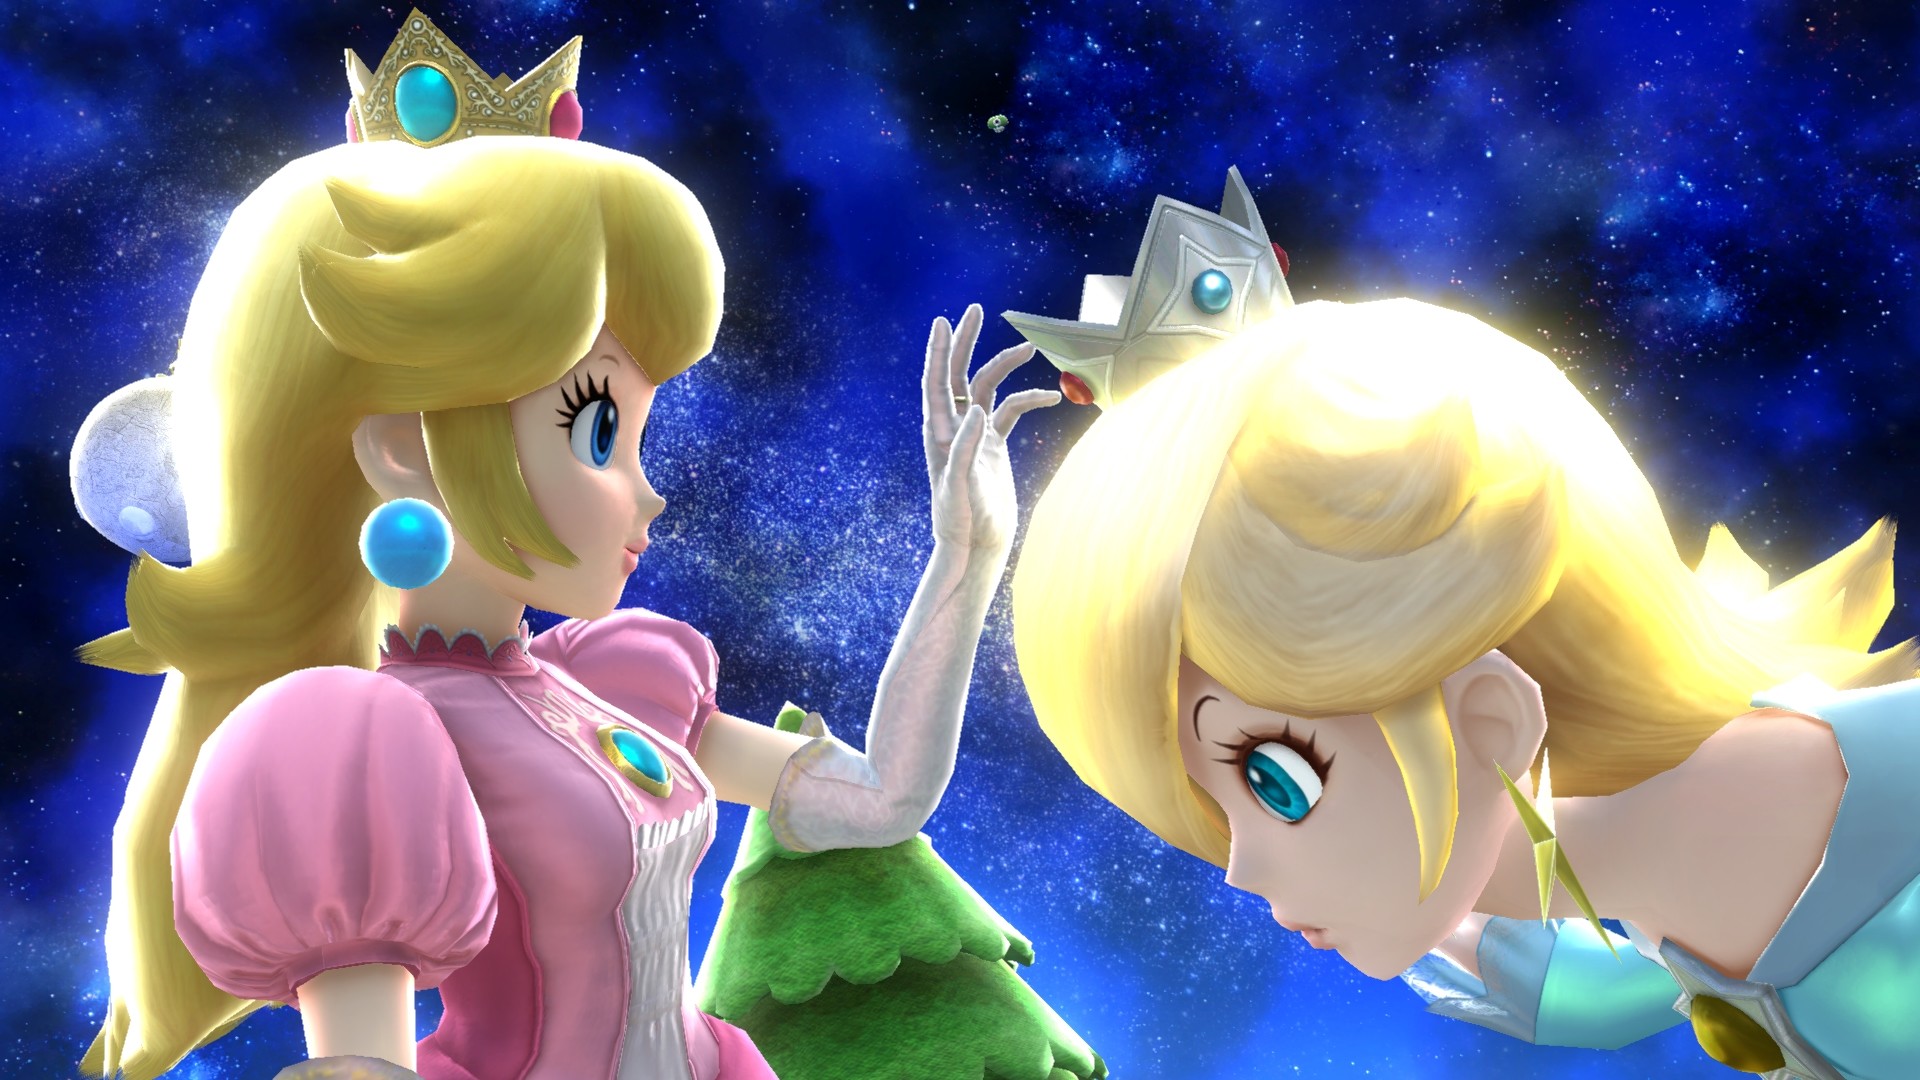 1920x1080 Is Rosalina hotter than Peach? - Super Smash Bros. for Wii U Message Board  for Wii U - Page 6 - GameFAQs